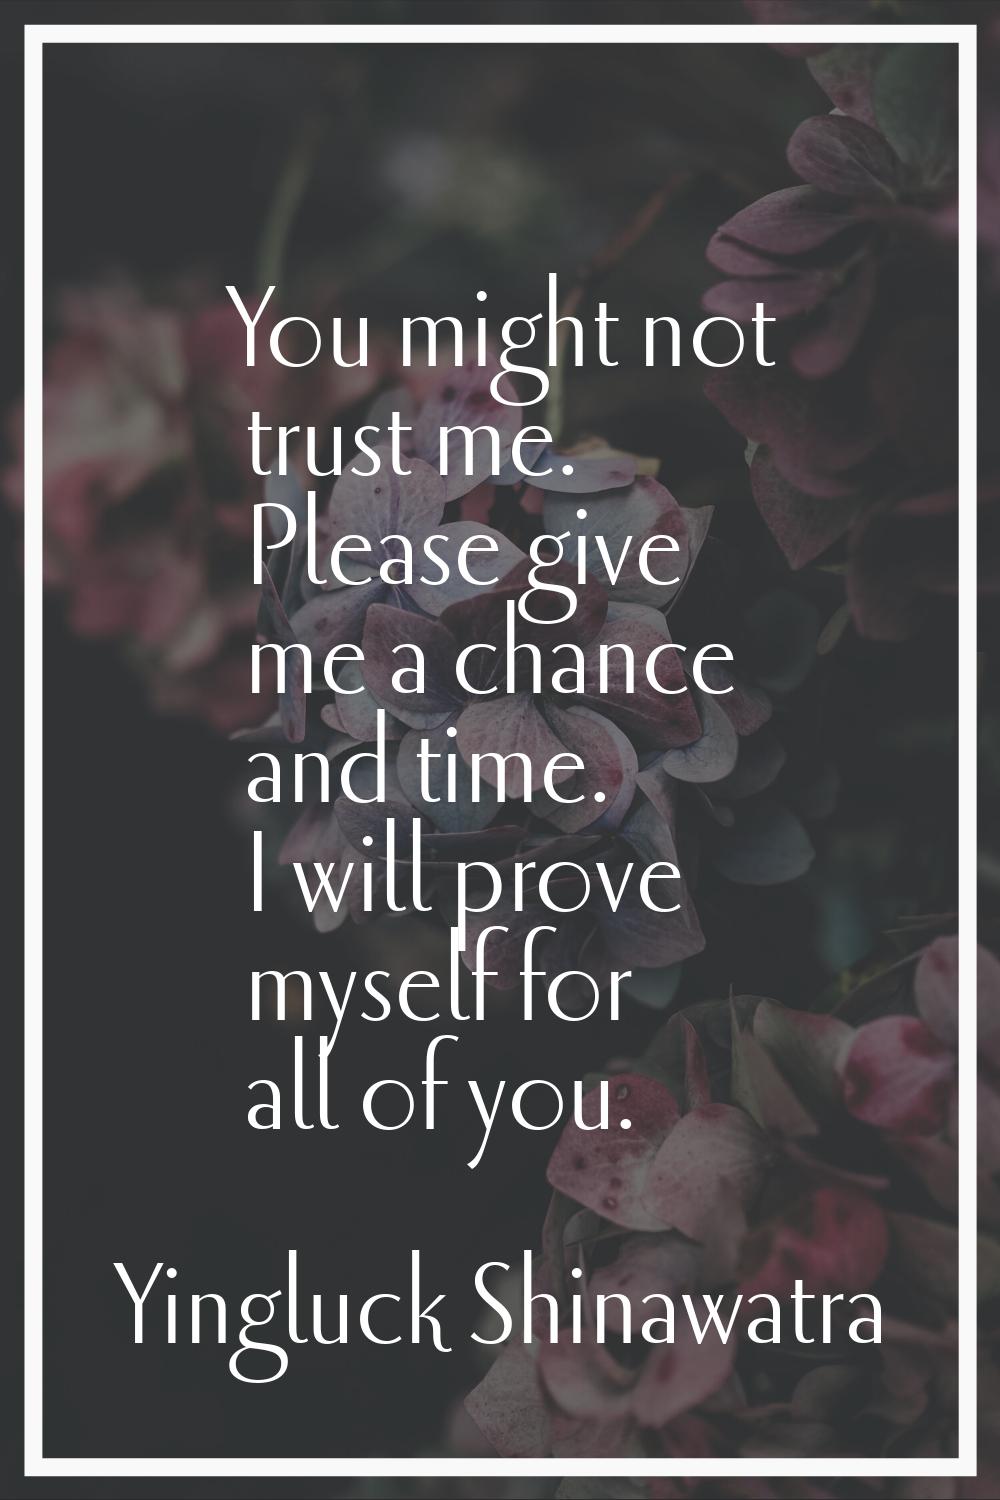 You might not trust me. Please give me a chance and time. I will prove myself for all of you.